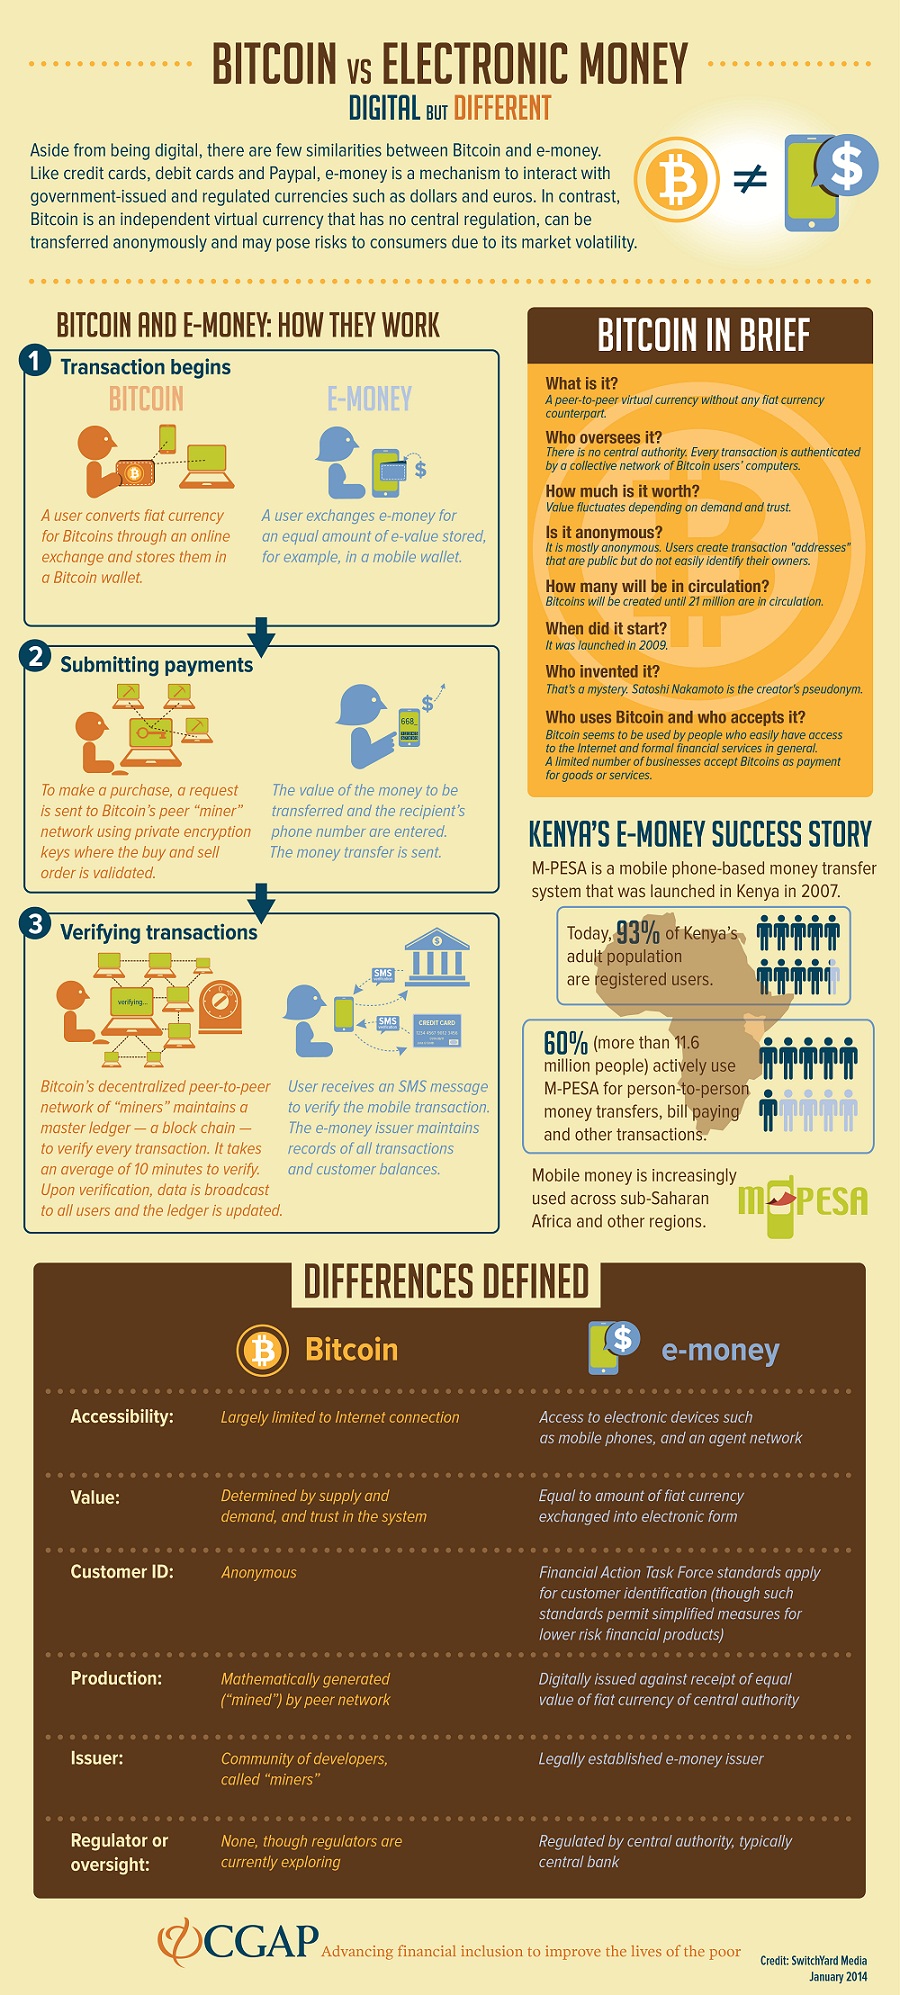 Explained: Differences Between Electronic Money and Bitcoin